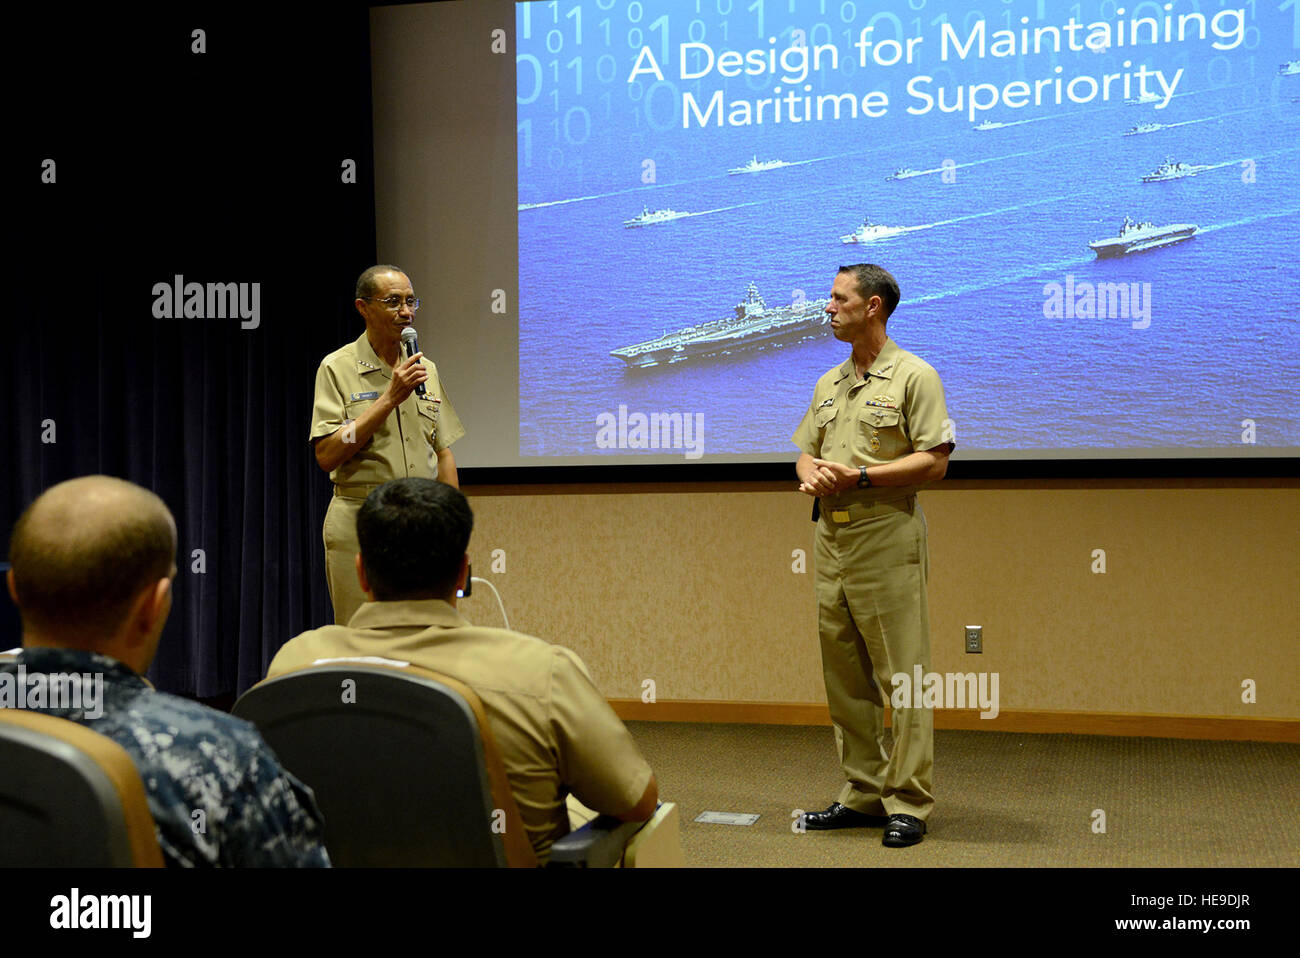 U.S. Navy Adm. Cecil D. Haney (left), U.S. Strategic Command (USSTRATCOM) commander, introduces the Chief of Naval Operations (CNO), U.S. Navy Adm. John M. Richardson, during a Navy all-hands call at Offutt Air Force Base, Neb., Aug. 24, 2016. During the forum, Richardson discussed the U.S. Navy’s design for maintaining maritime security today and into the future and answered questions from members of the audience. While here, Richardson also participated in discussions with Haney and other USSTRATCOM leaders on modernization of the sea-based leg of the nuclear triad and other areas of collabo Stock Photo